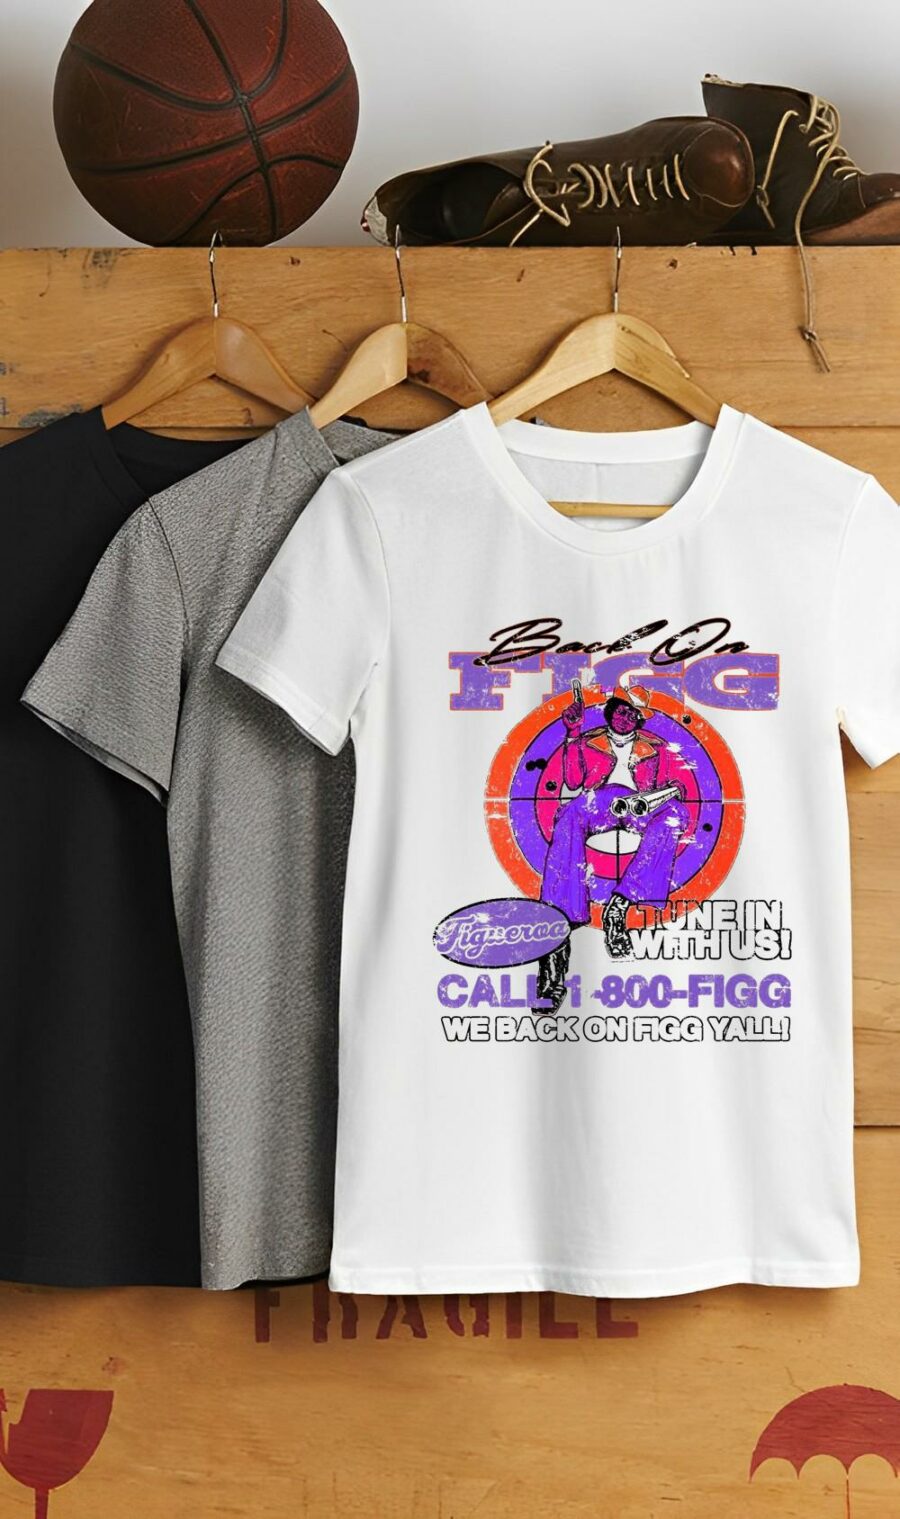 figueroa bof figg tee back on figg tune in wfth us we back on figg yall shirt